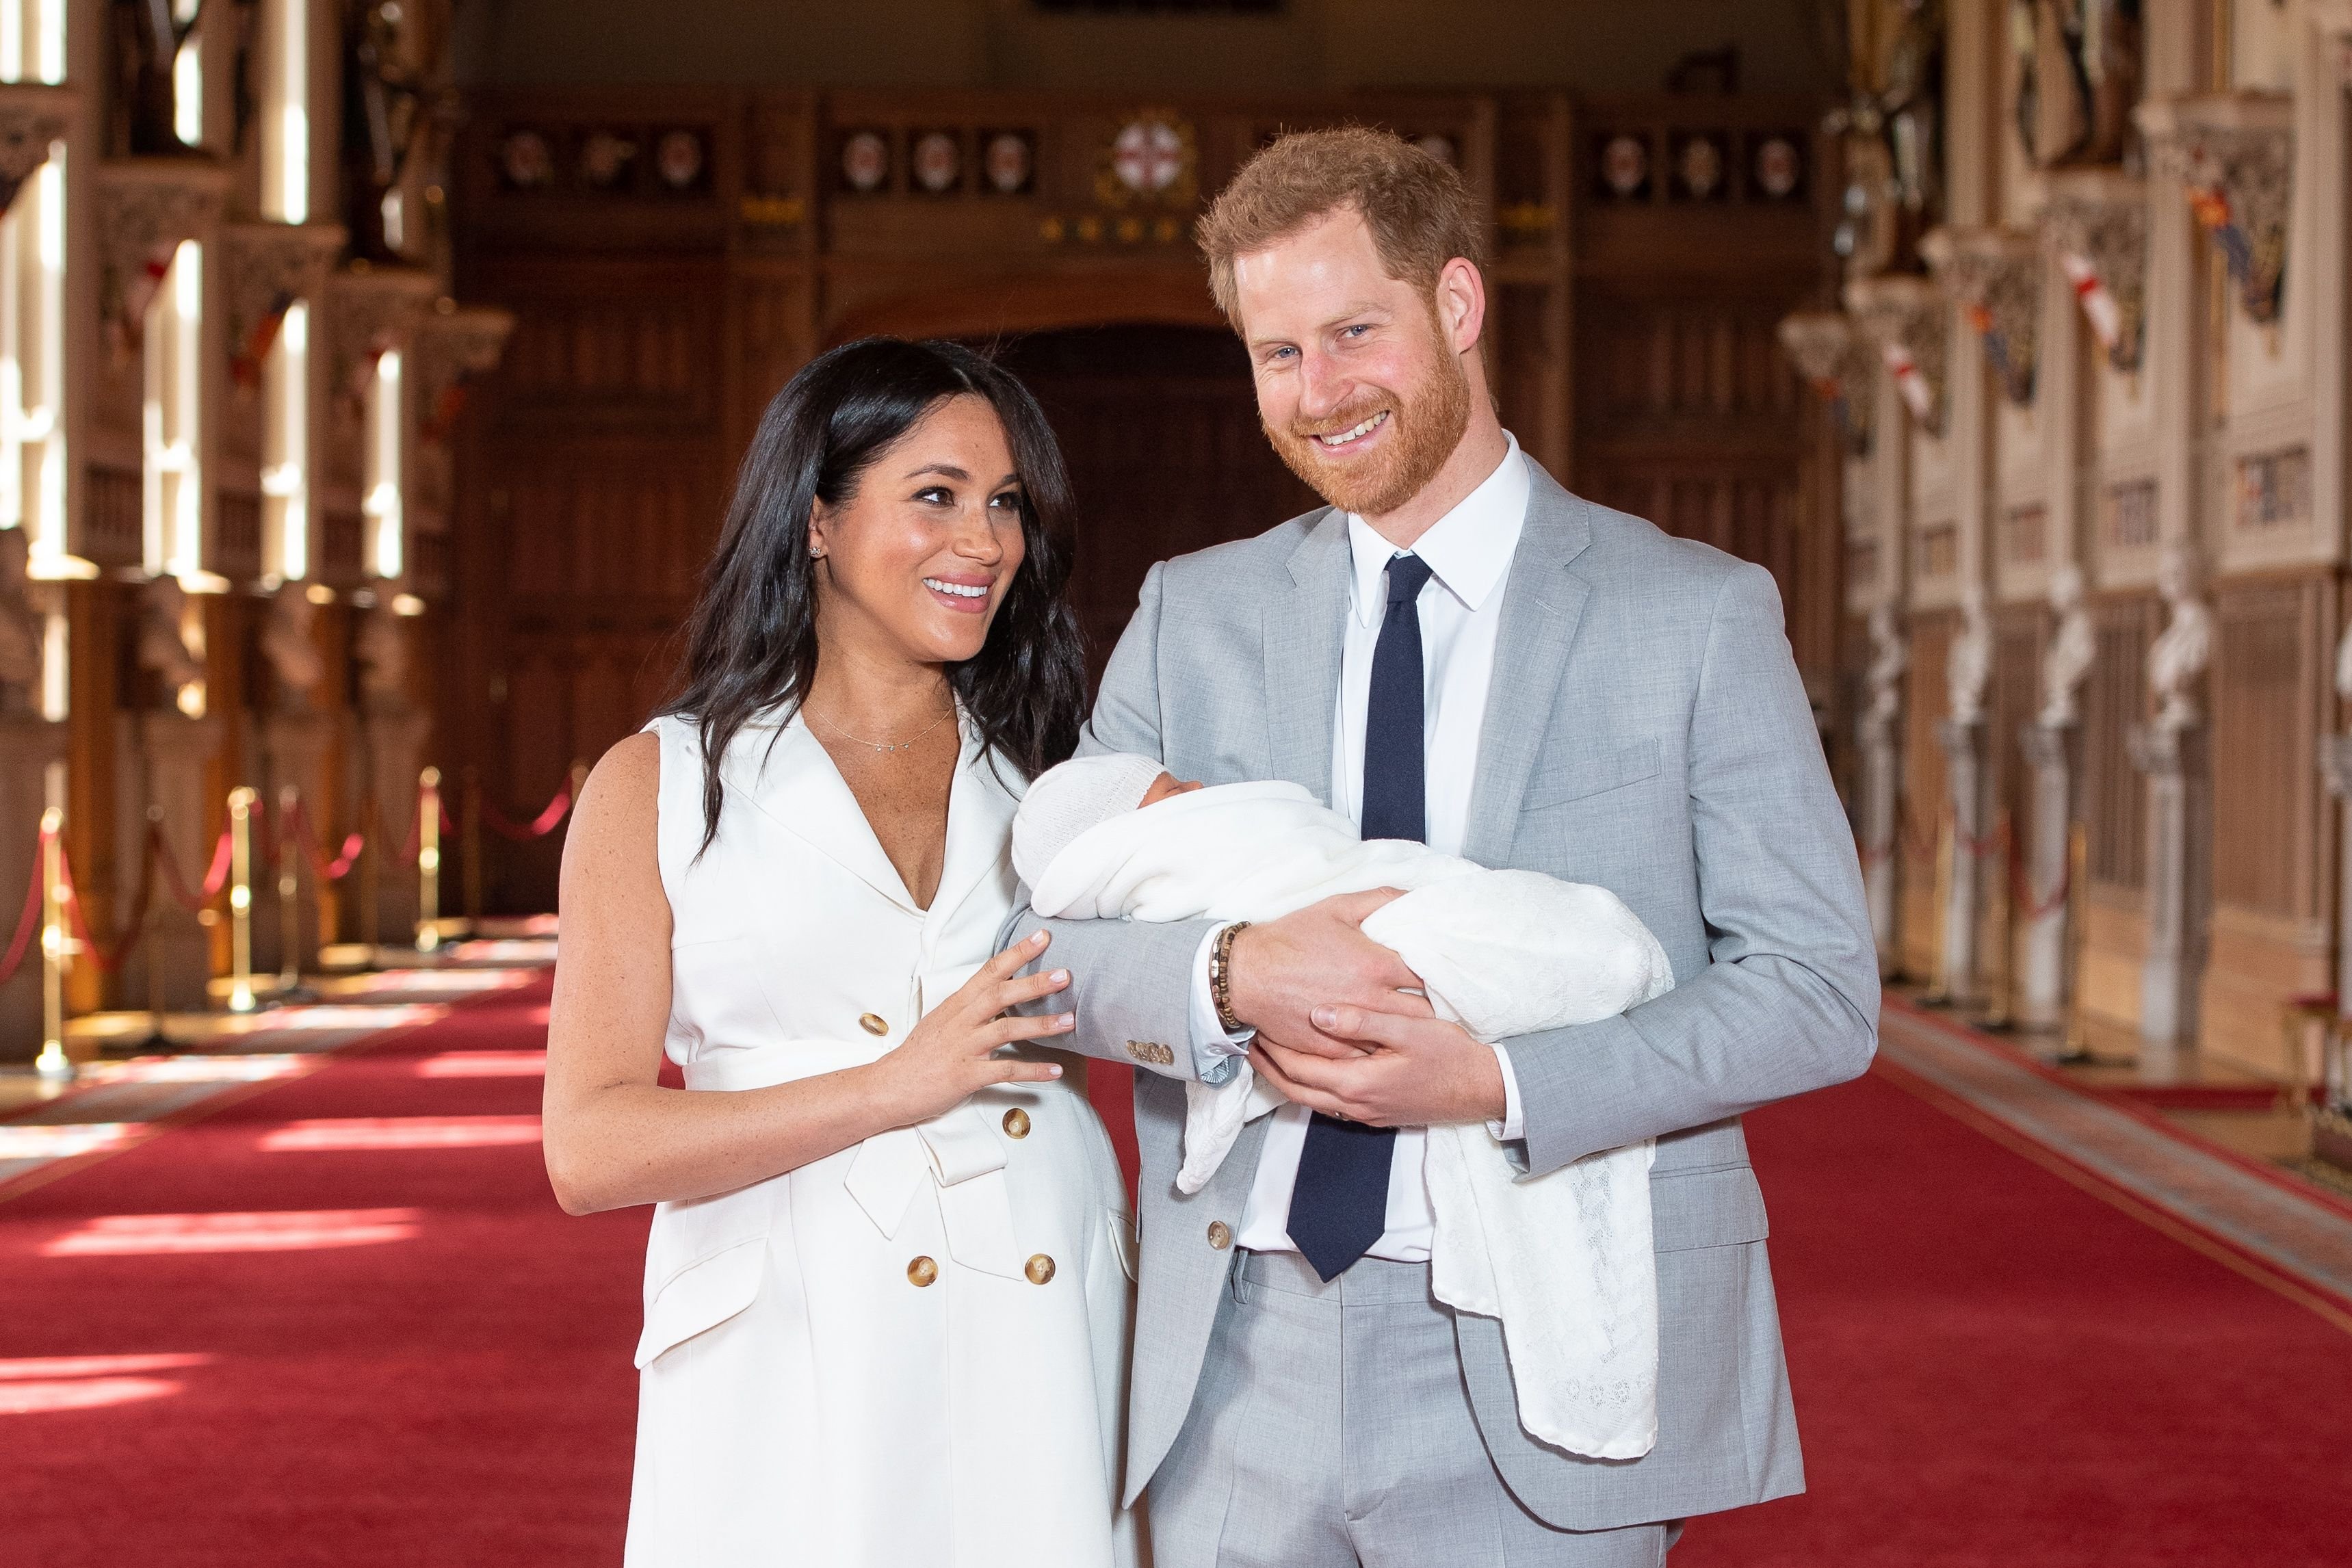 Prince Harry and Meghan Markle pose with their newborn son Archie Harrison Mountbatten-Windsor on May 8, 2019 in Windsor, England | Photo: Getty Images